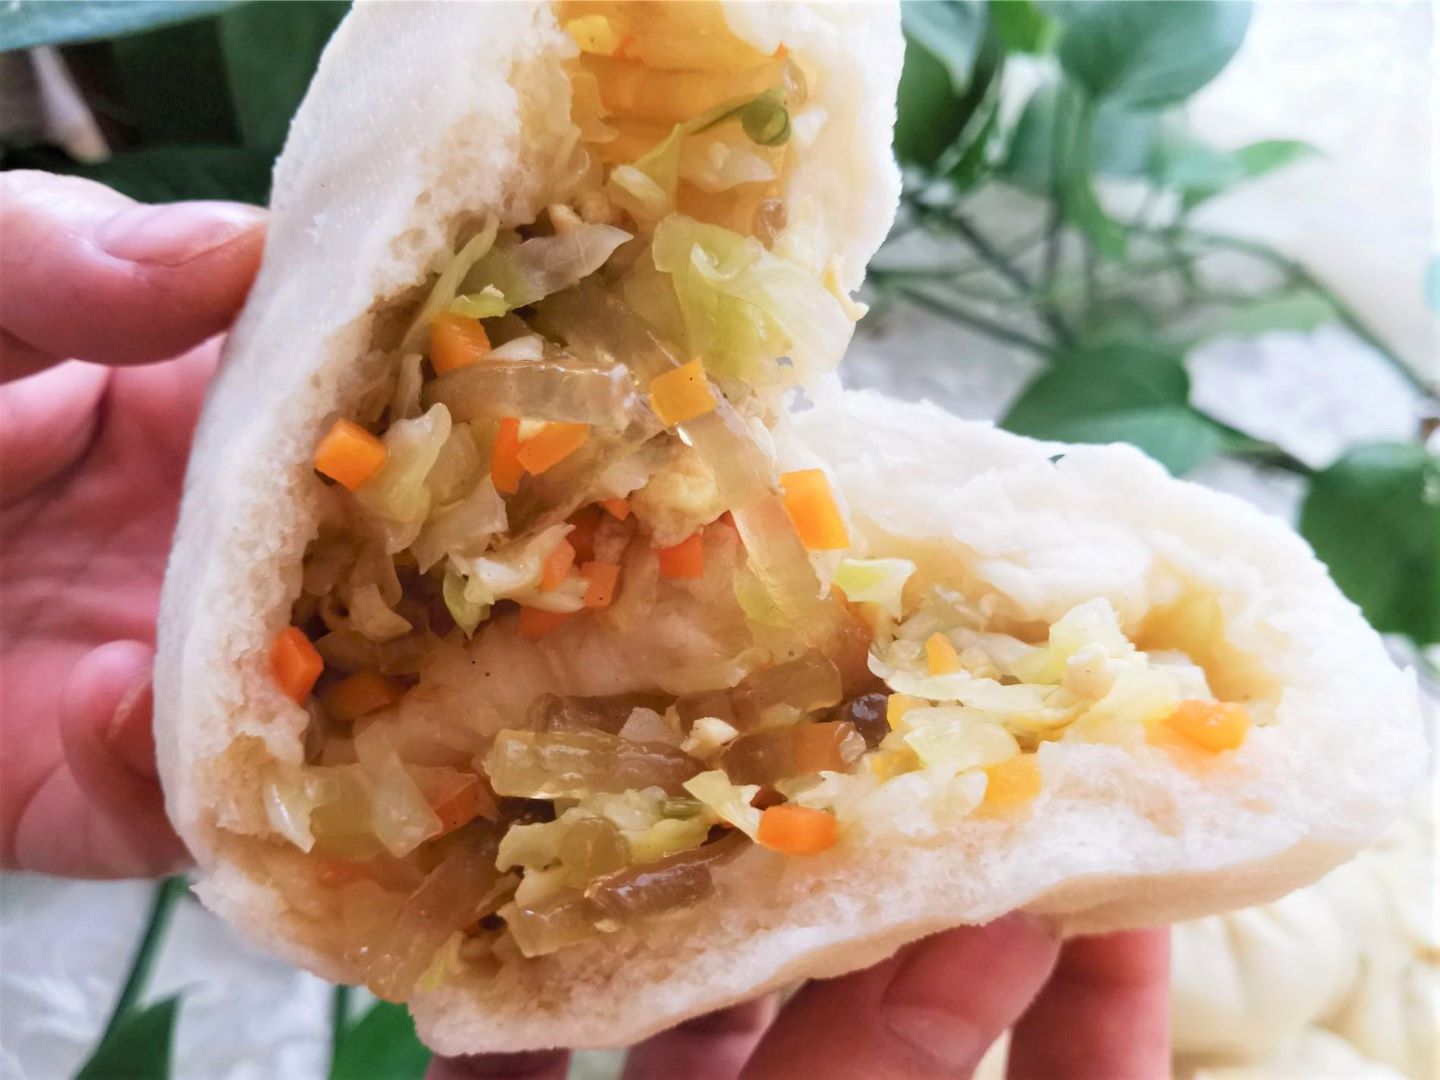 Chinese Bun Recipe Steamed Bun With Cabbage, Egg And Vermicelli 2020